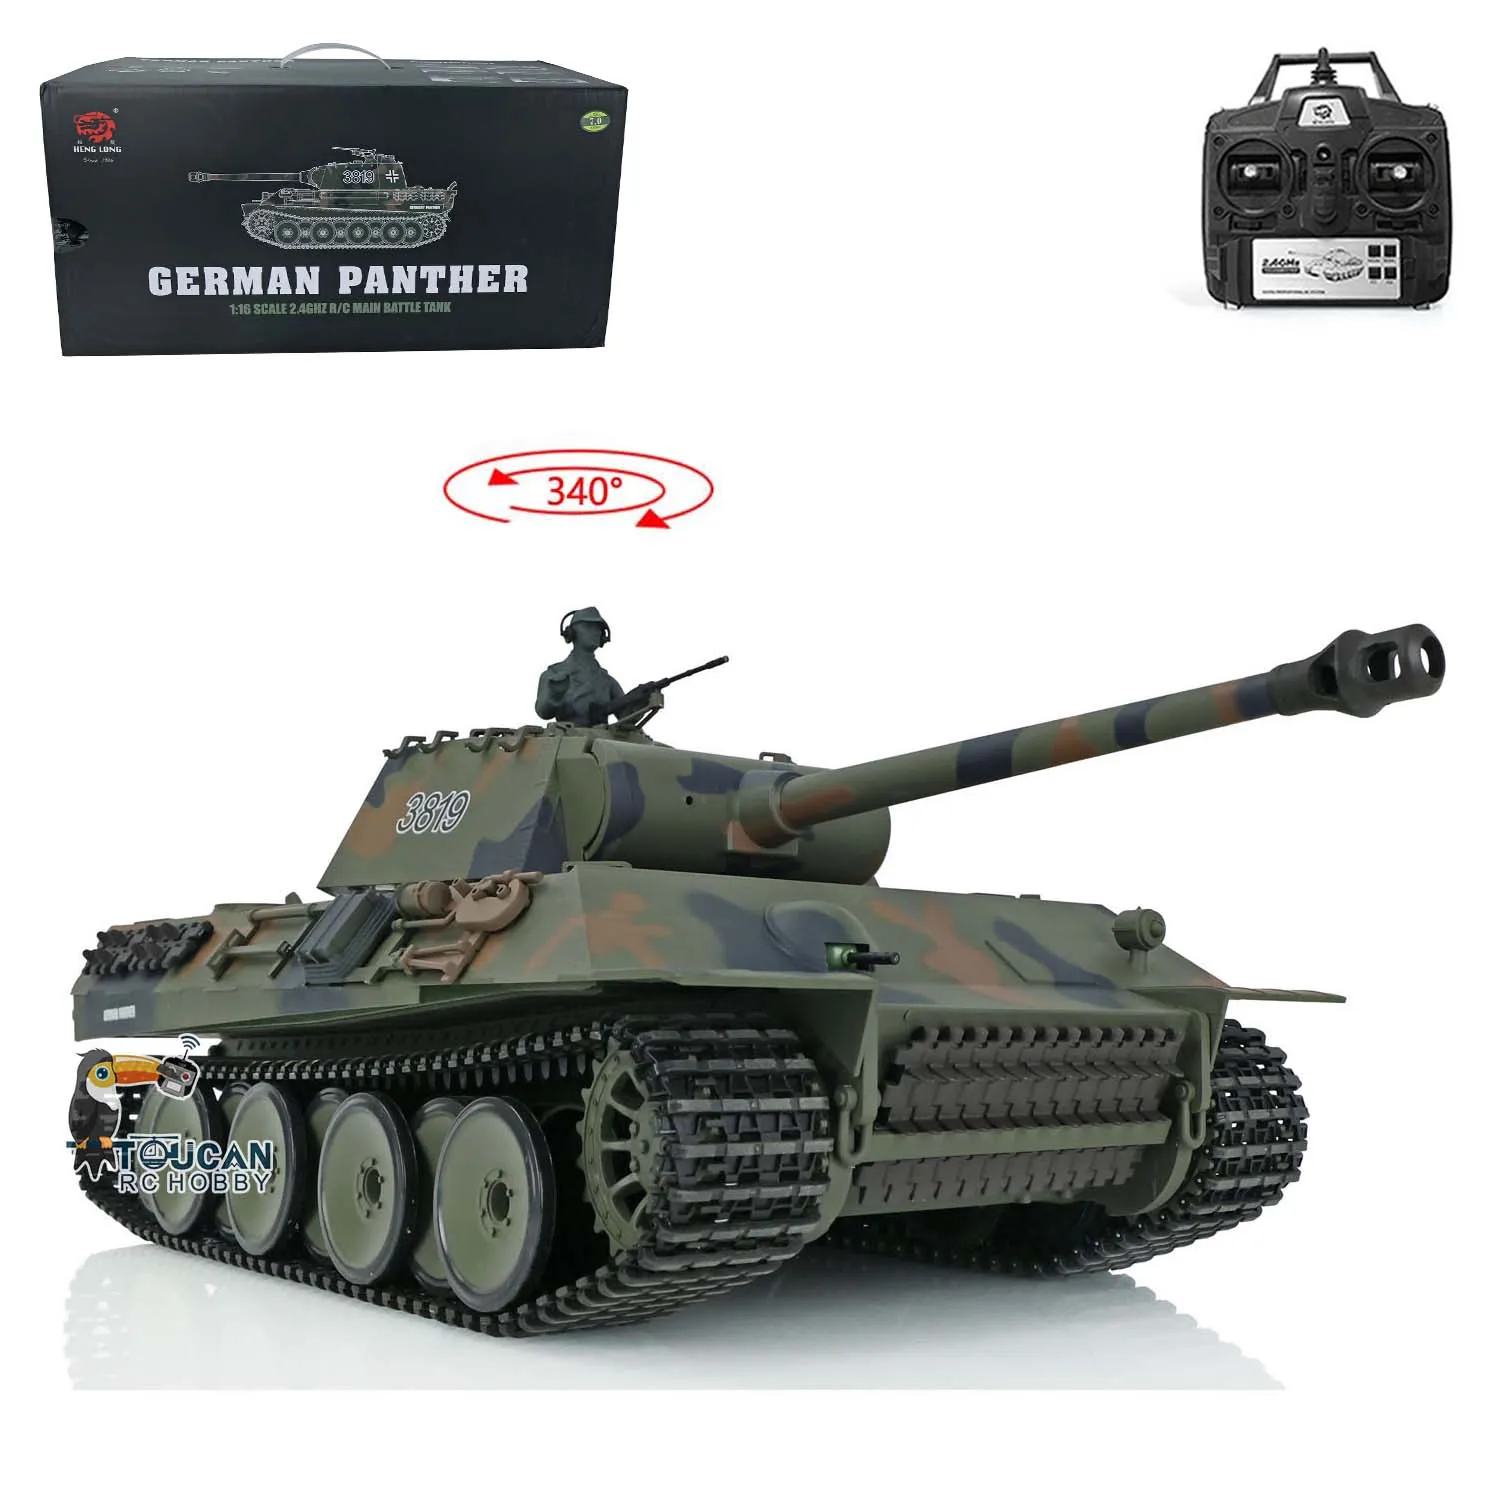 

2.4Ghz Heng Long 1/16 7.0 Plastic Ver German Panther V RTR RC Tank 3819 Model Toys for Boys Vehicle TH17285